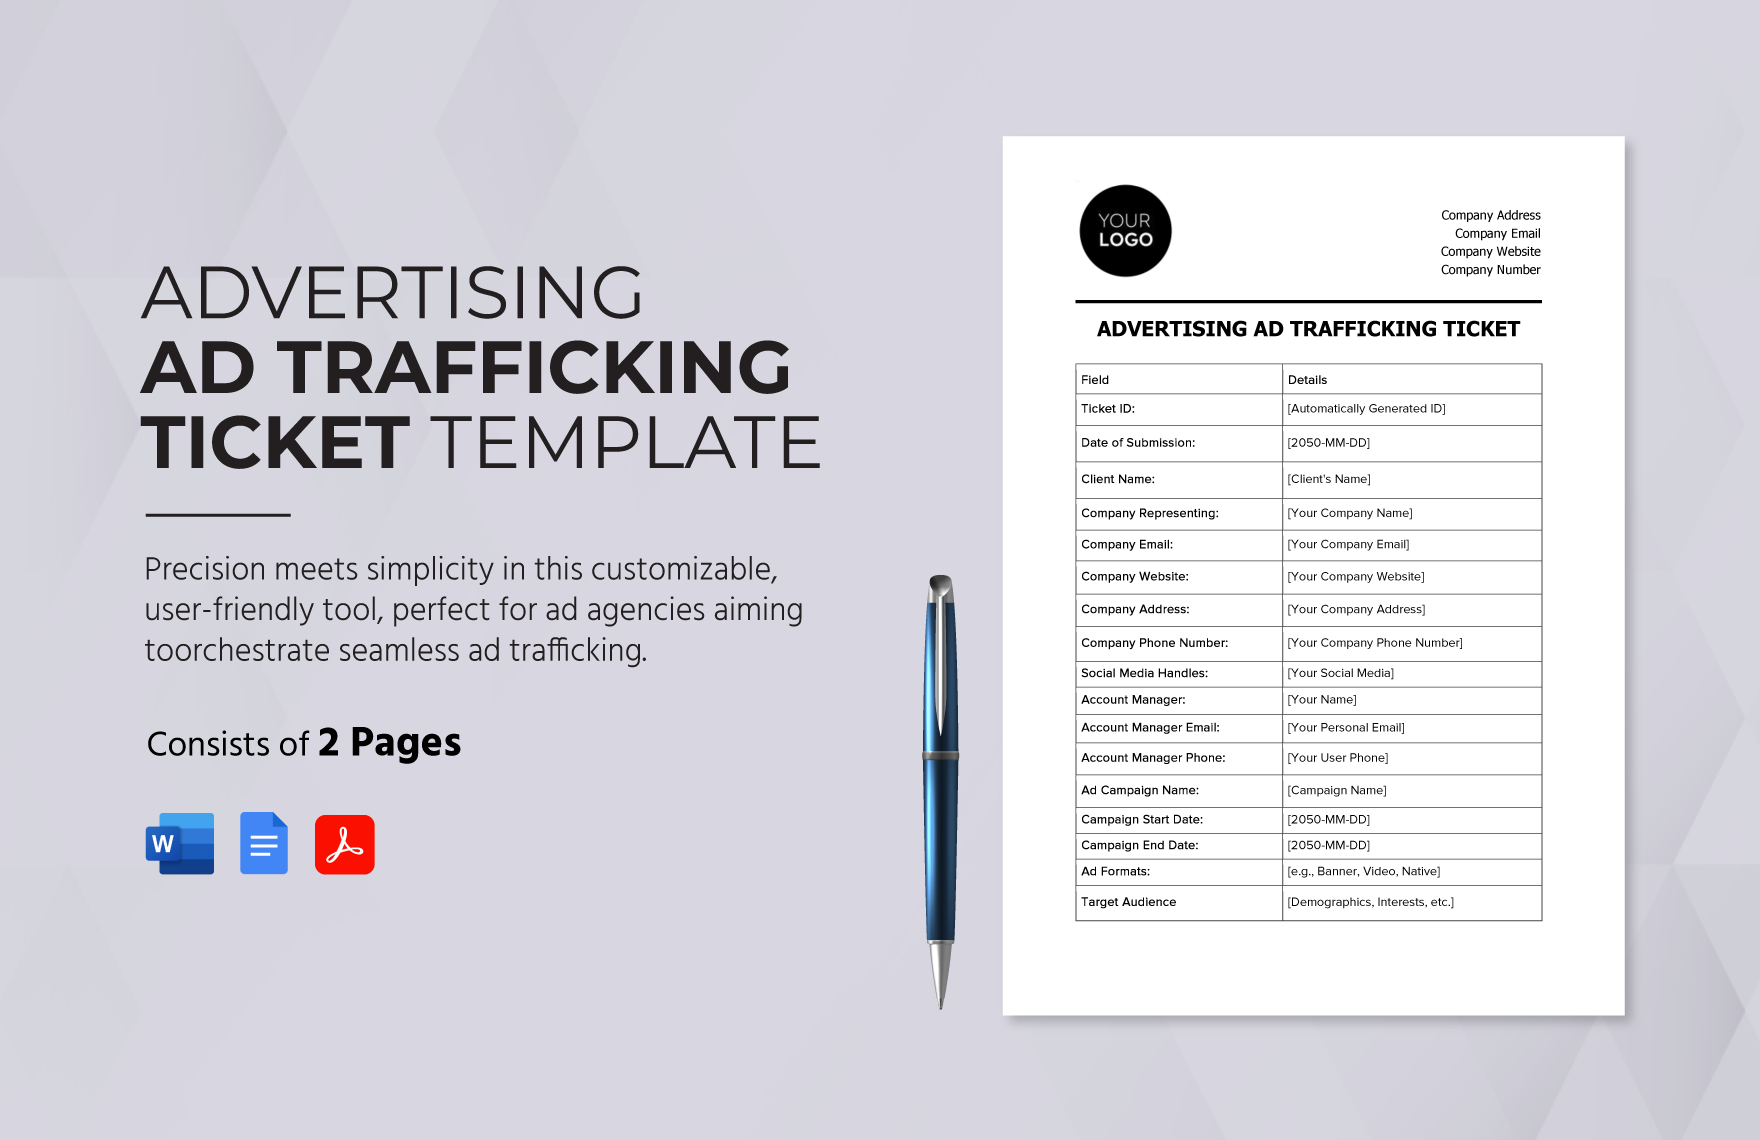 Advertising Ad Trafficking Ticket Template